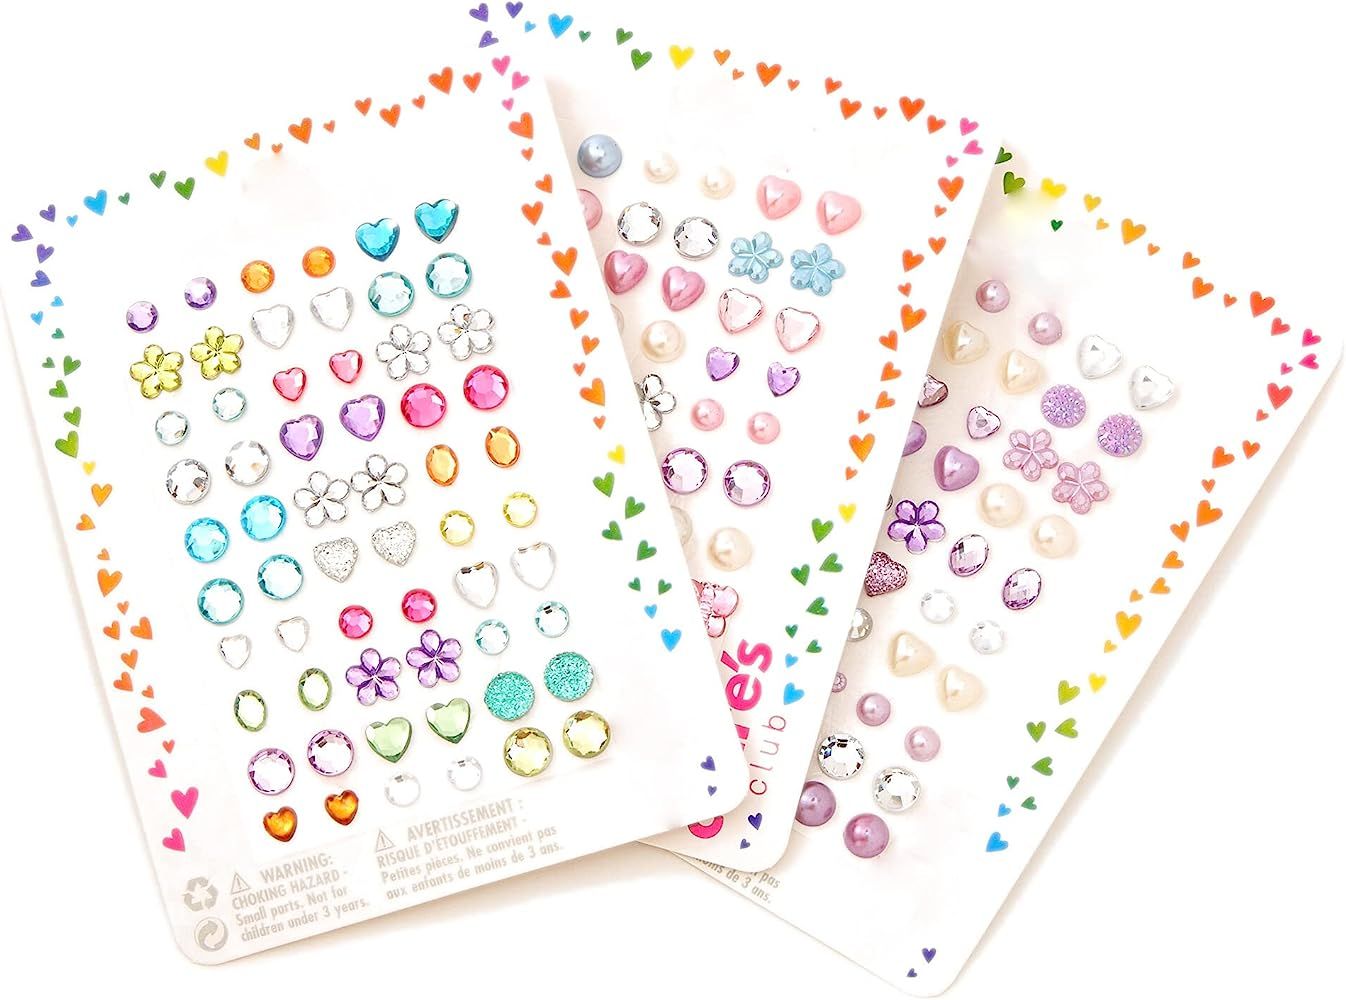 Claire's Club Stick on Earrings Bundle, Cute Jewelry for Girls, Assorted Styles, Rainbow, 3 Pack | Amazon (US)